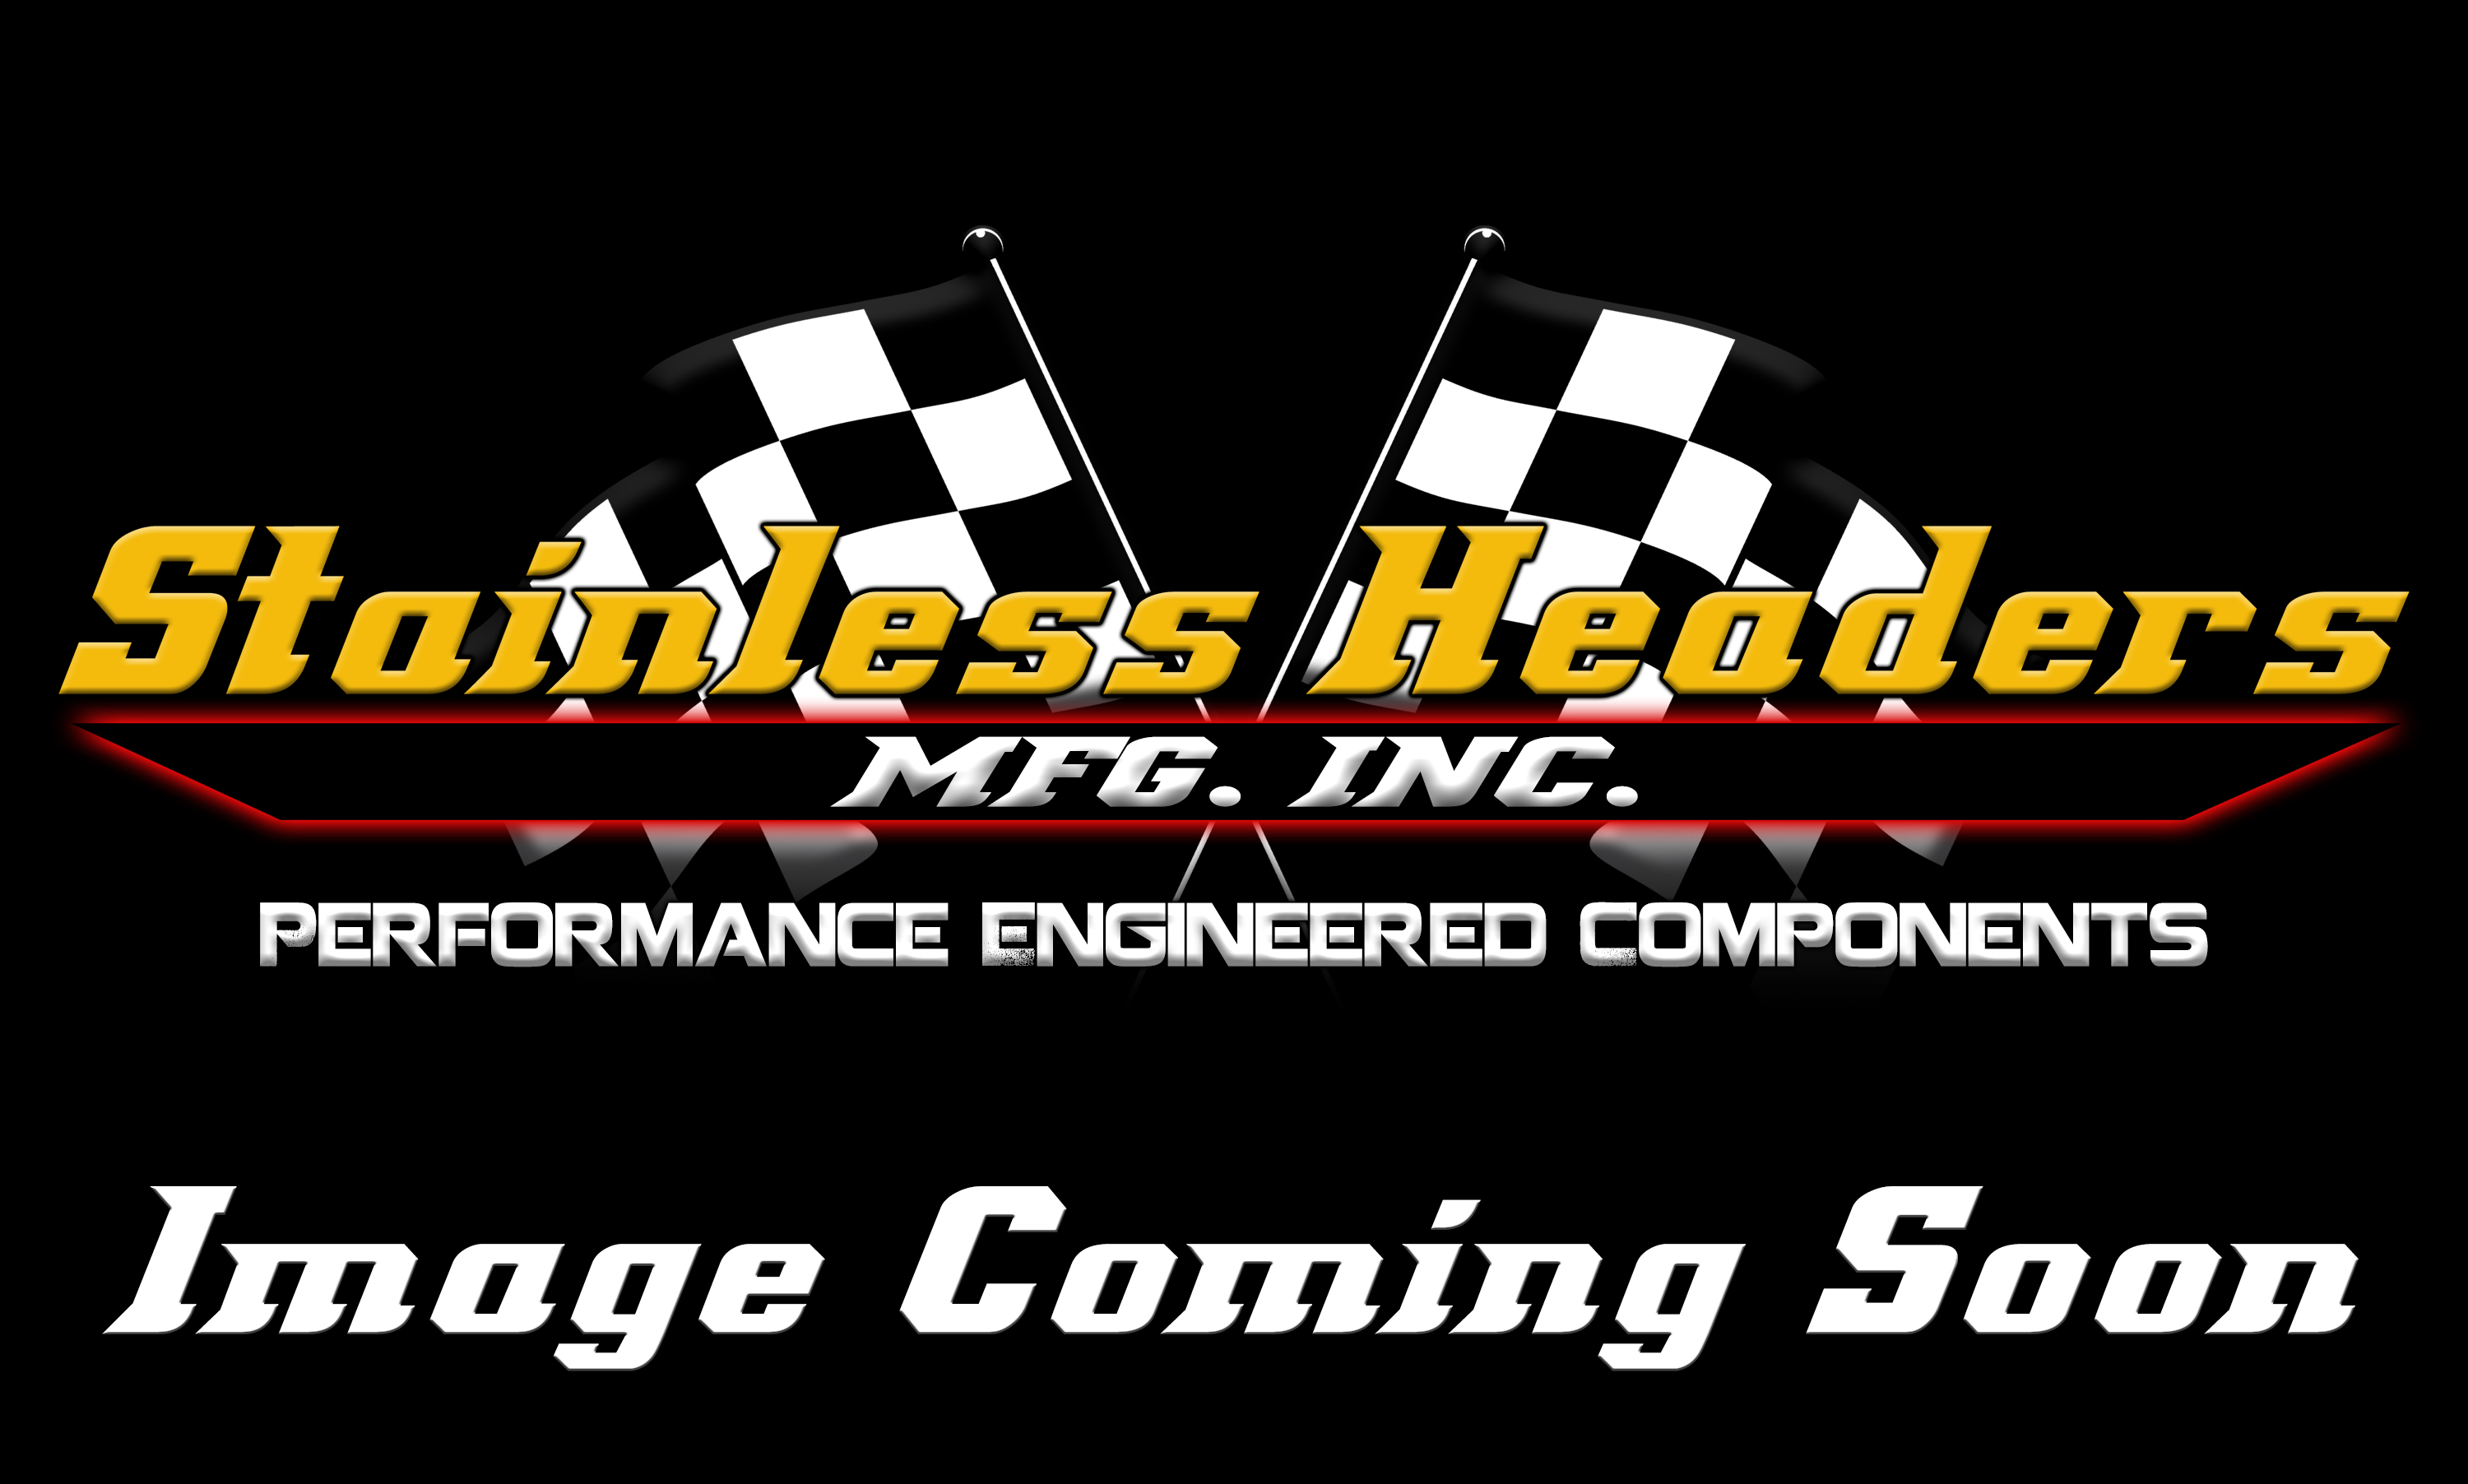 Stainless Headers - Chevy LS Turbo Manifold Build Kits